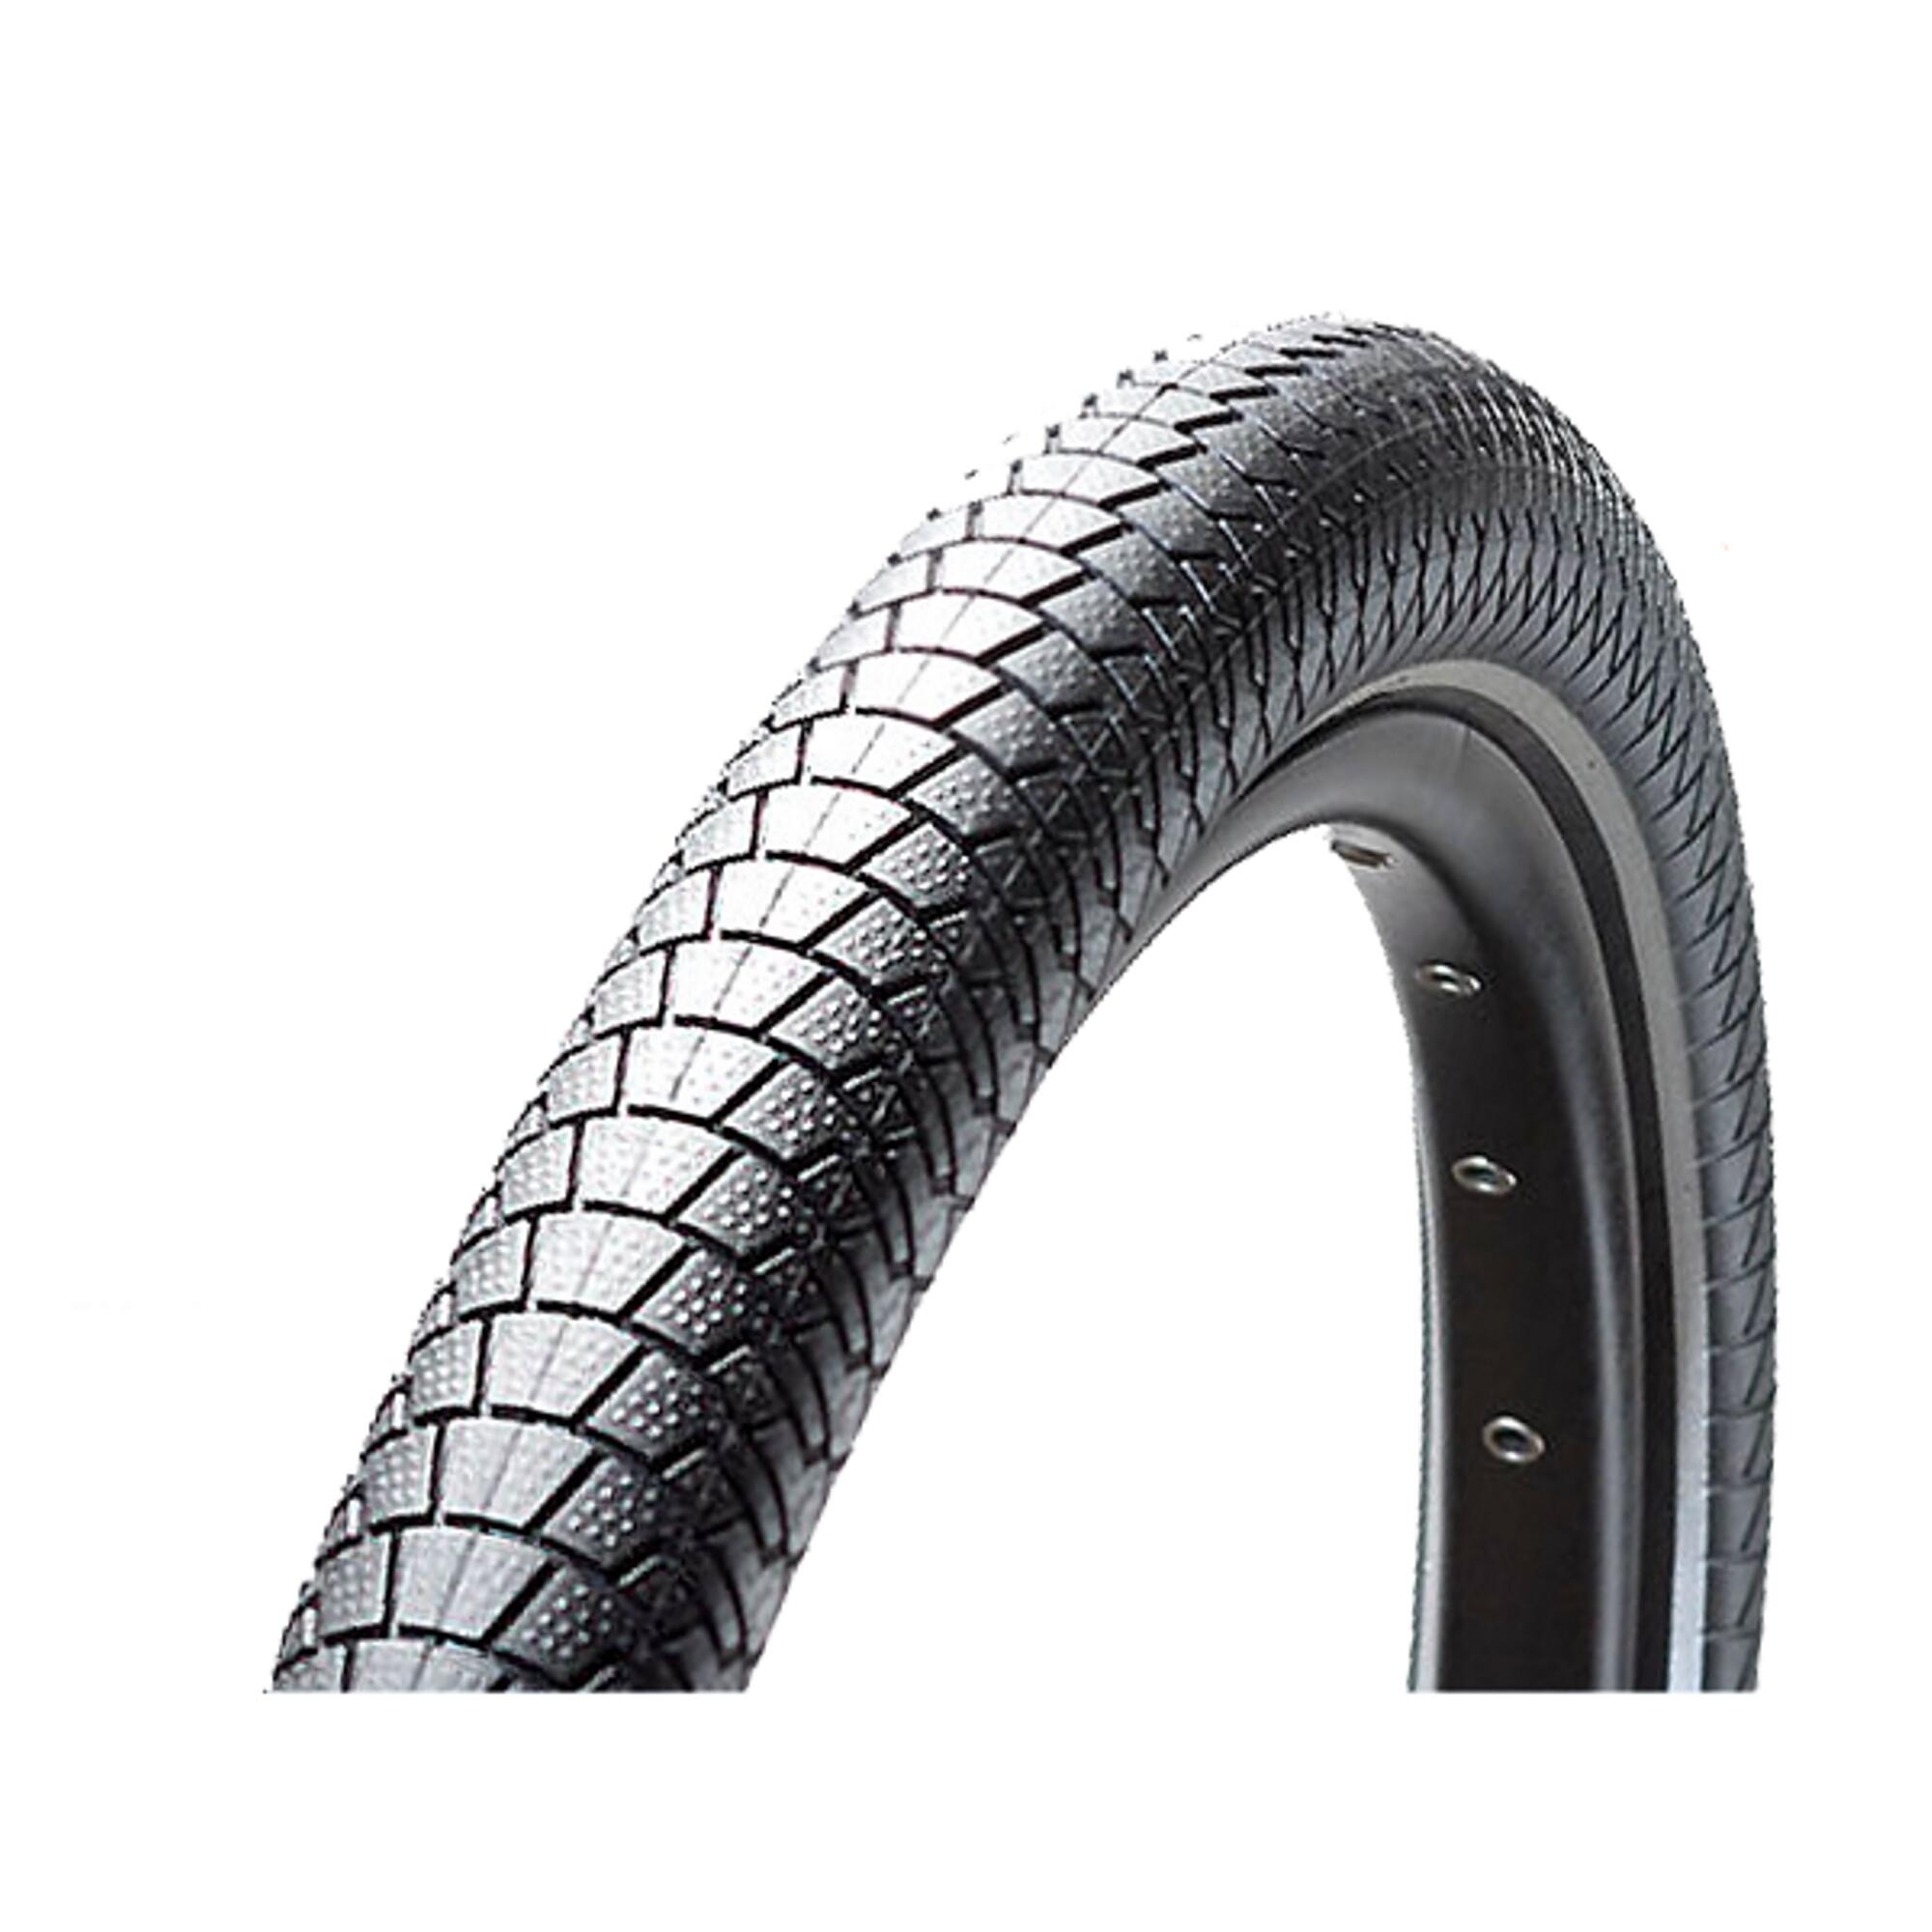 Tyre Cargo C1996 CST Brooklyn Pro 20"*2.15 55-406 For Longtail R500 Cargo Bike 2/2